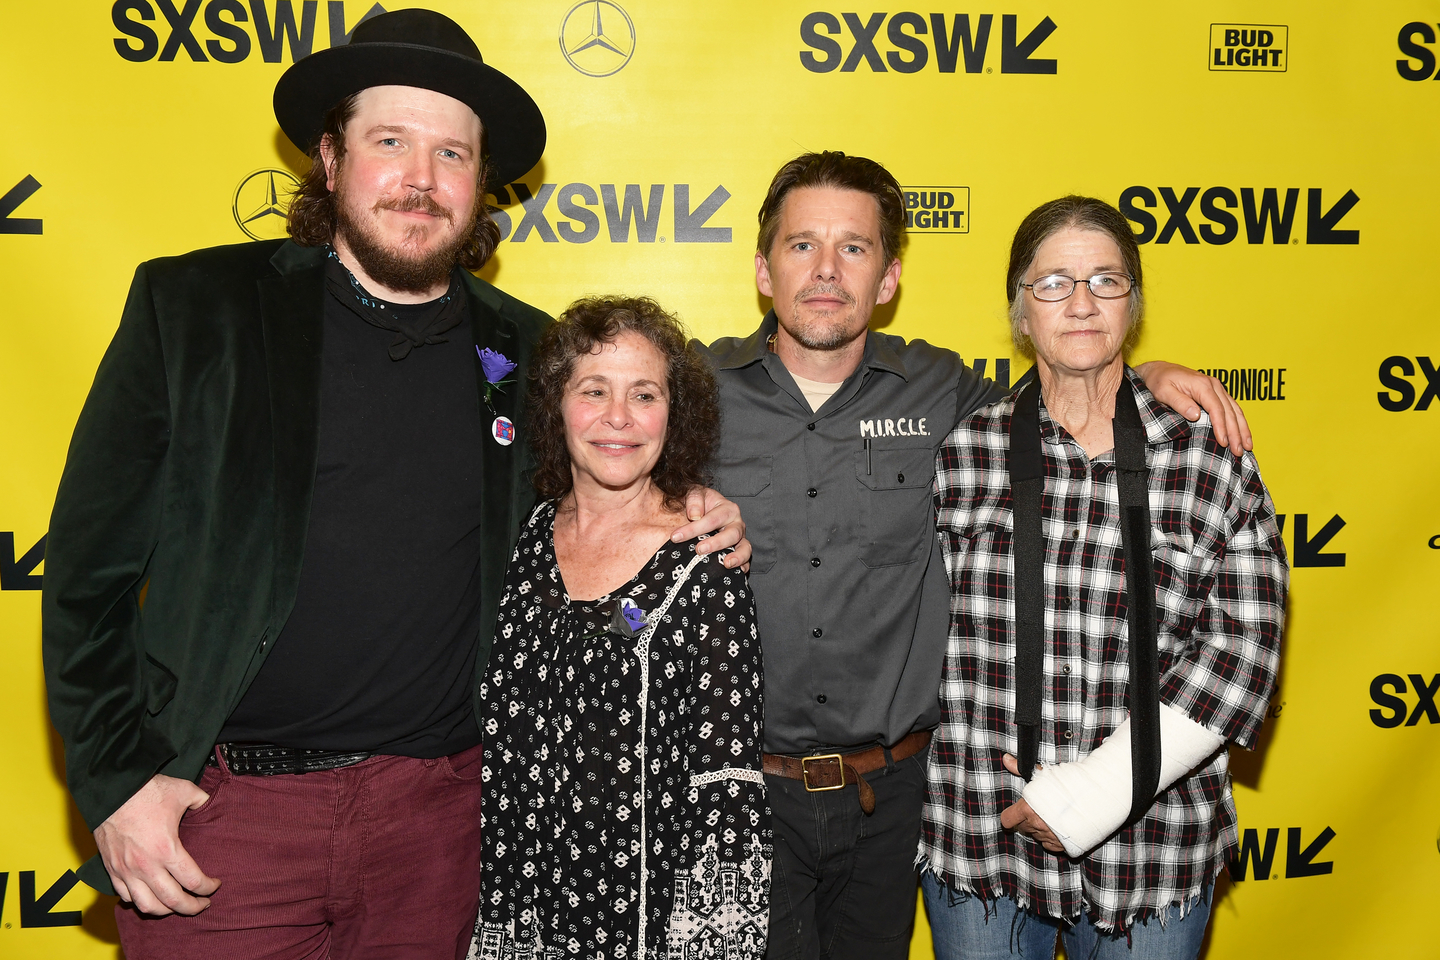 Ben Dickey, Sybil Rosen, Ethan Hawke and Marsha Weldon attended the Blaze screening at the Paramount Theatre.